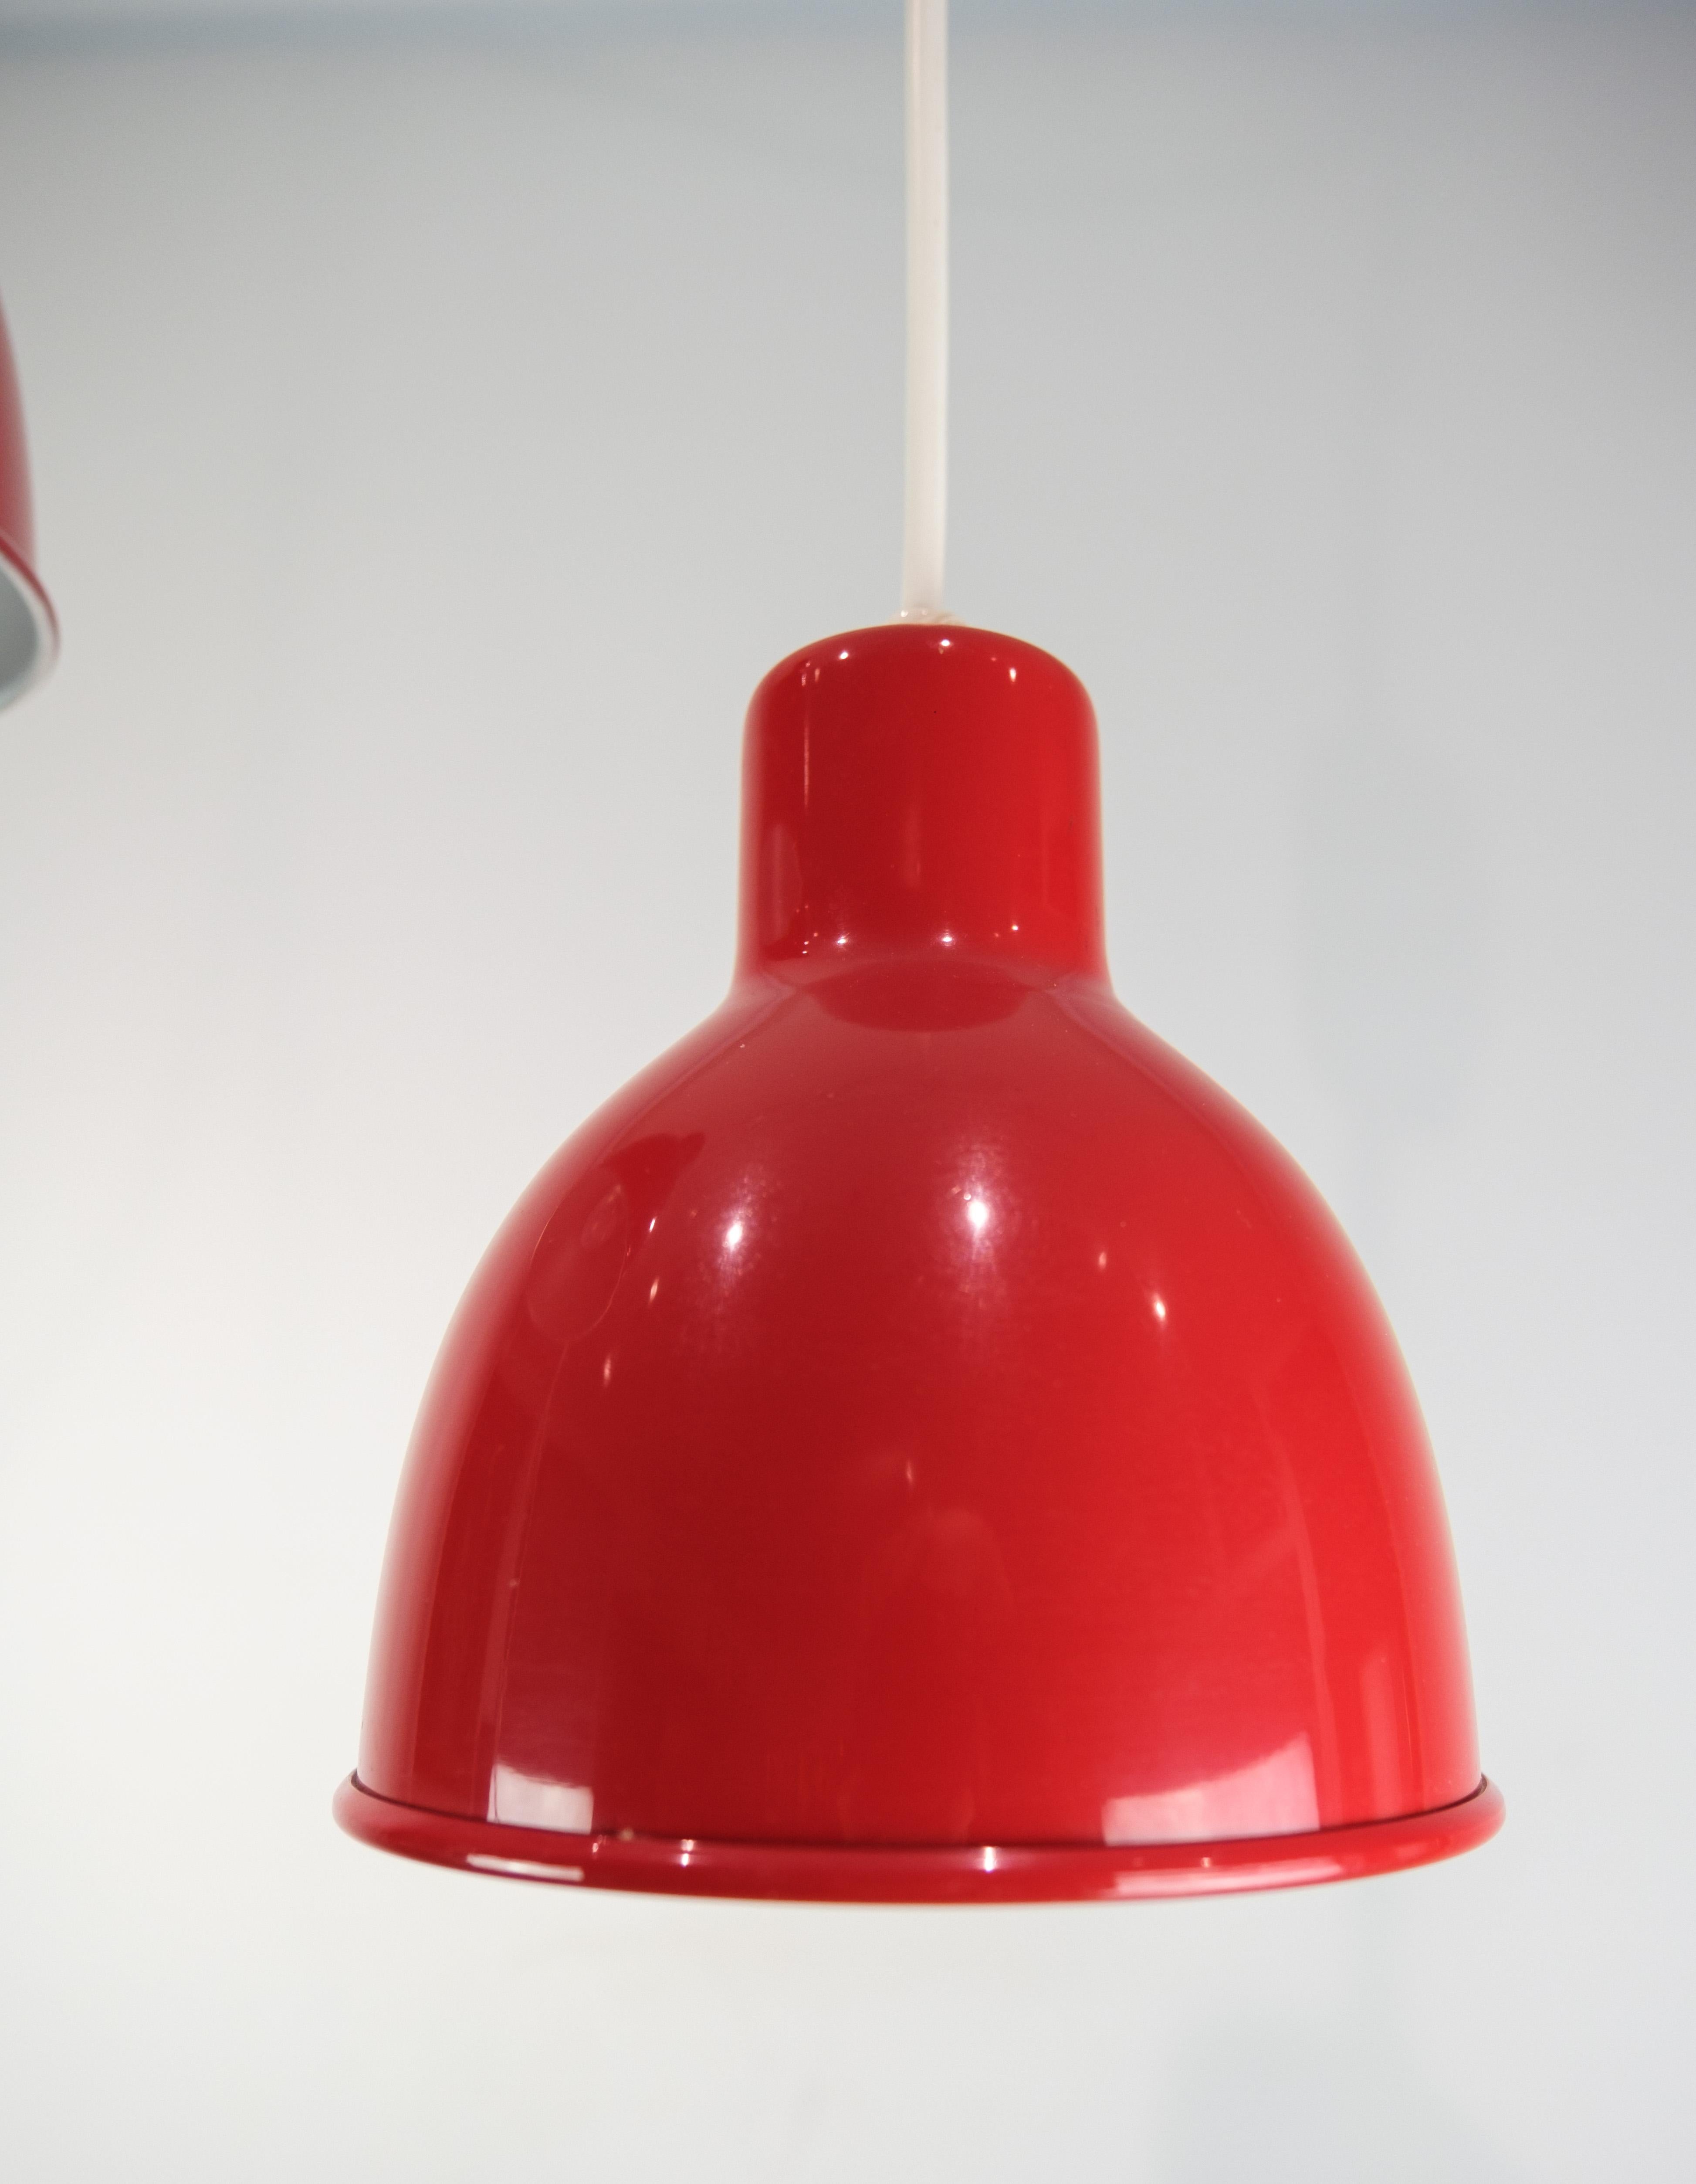 Set of 2 pendants in red lacquered metal of Danish design from around the 1970s

This product will be inspected thoroughly at our professional workshop by our educated employees, who assure the product quality.